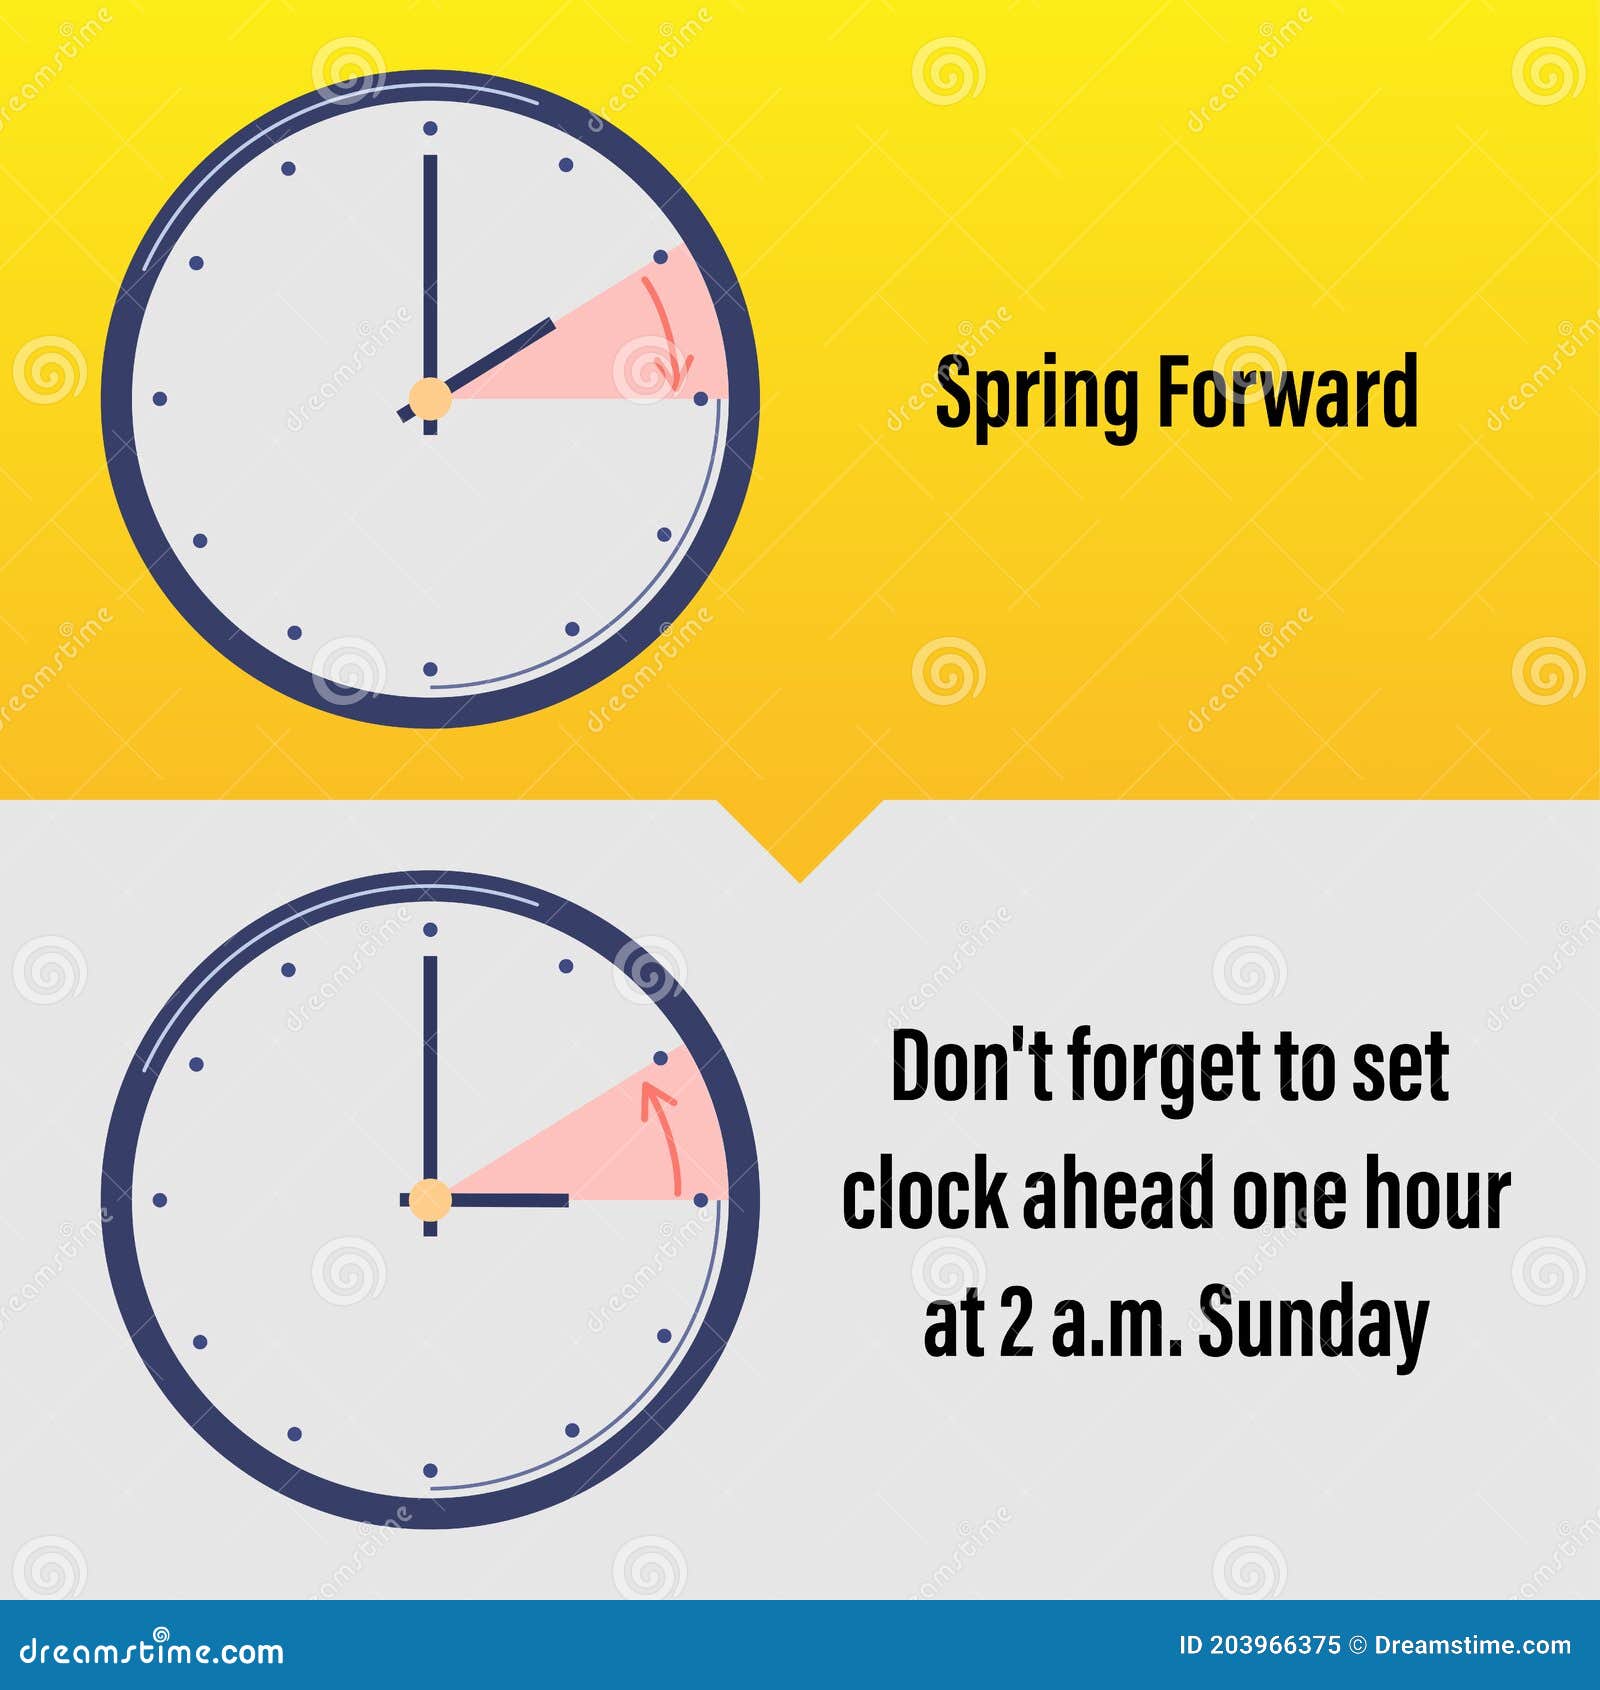 Daylight Saving Time Ends Concept. the Hand of the Clocks Turning To